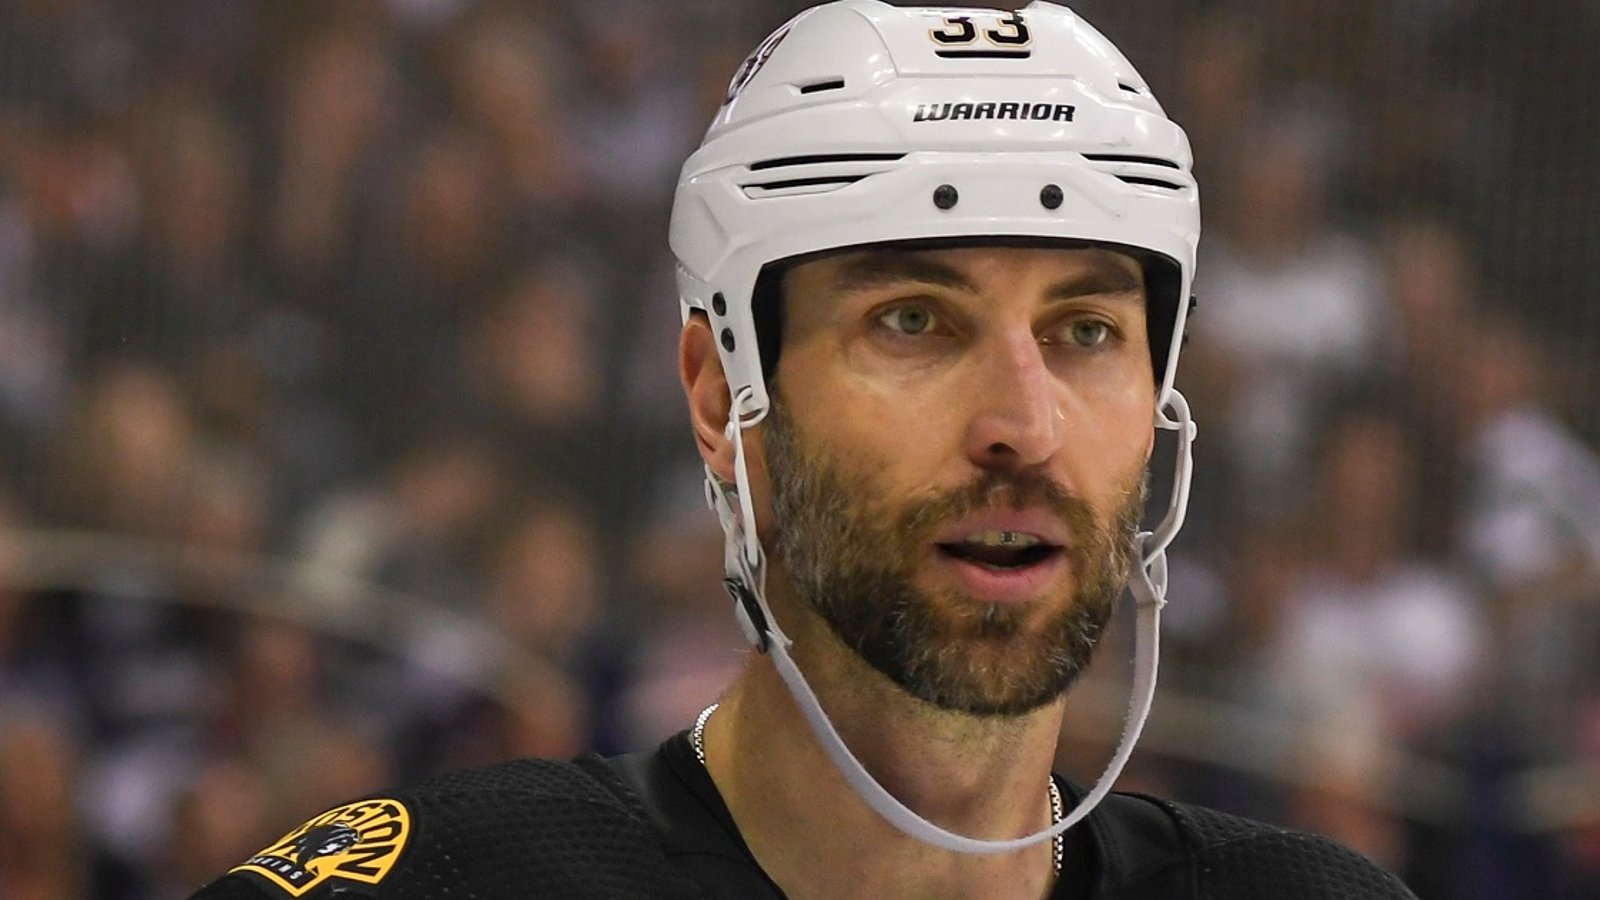 Big update on Zdeno Chara from Bruins' Monday morning practice. 